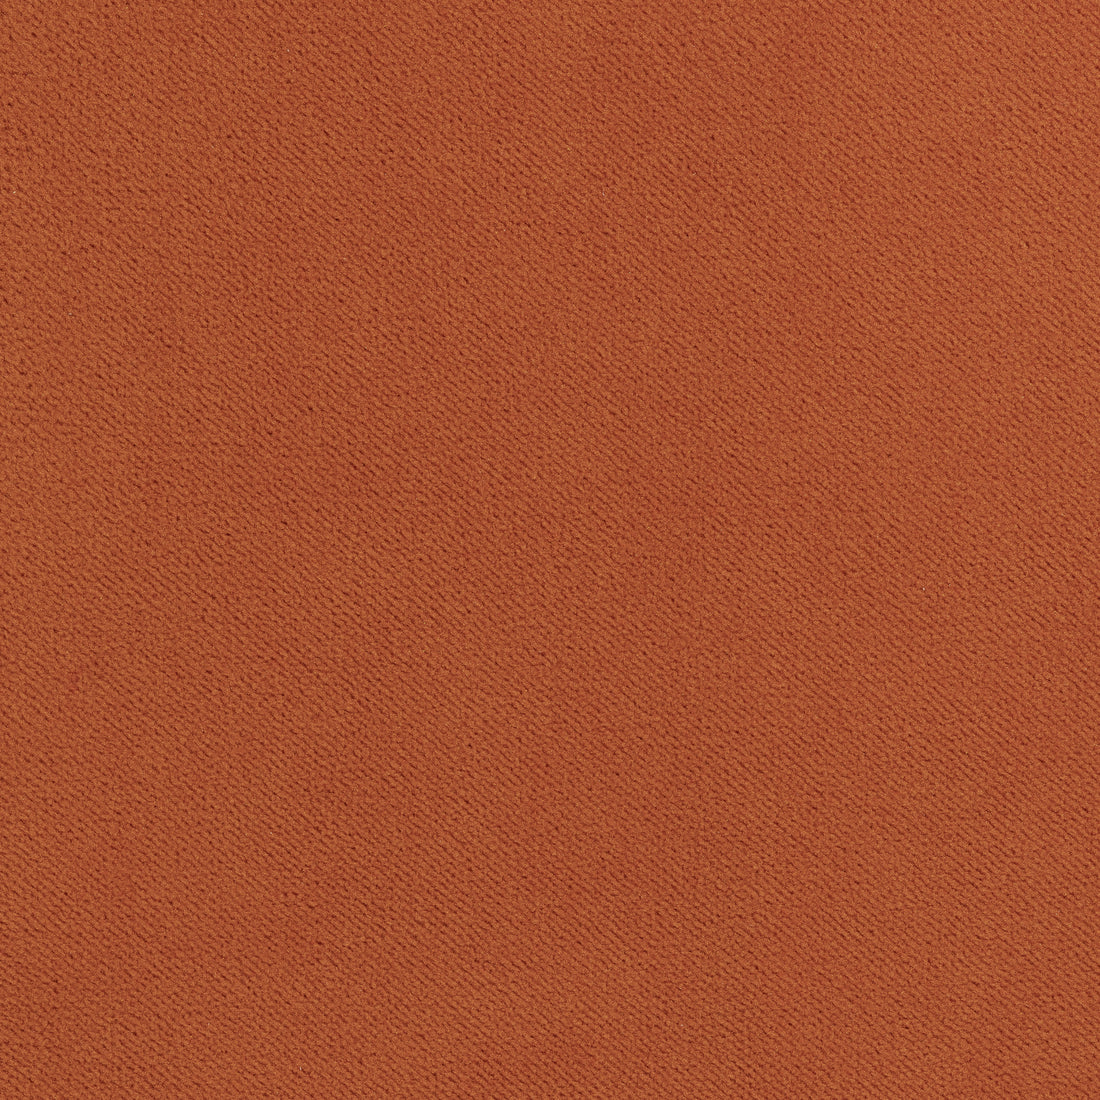 Club Velvet fabric in terra cotta color - pattern number W7203 - by Thibaut in the Club Velvet collection